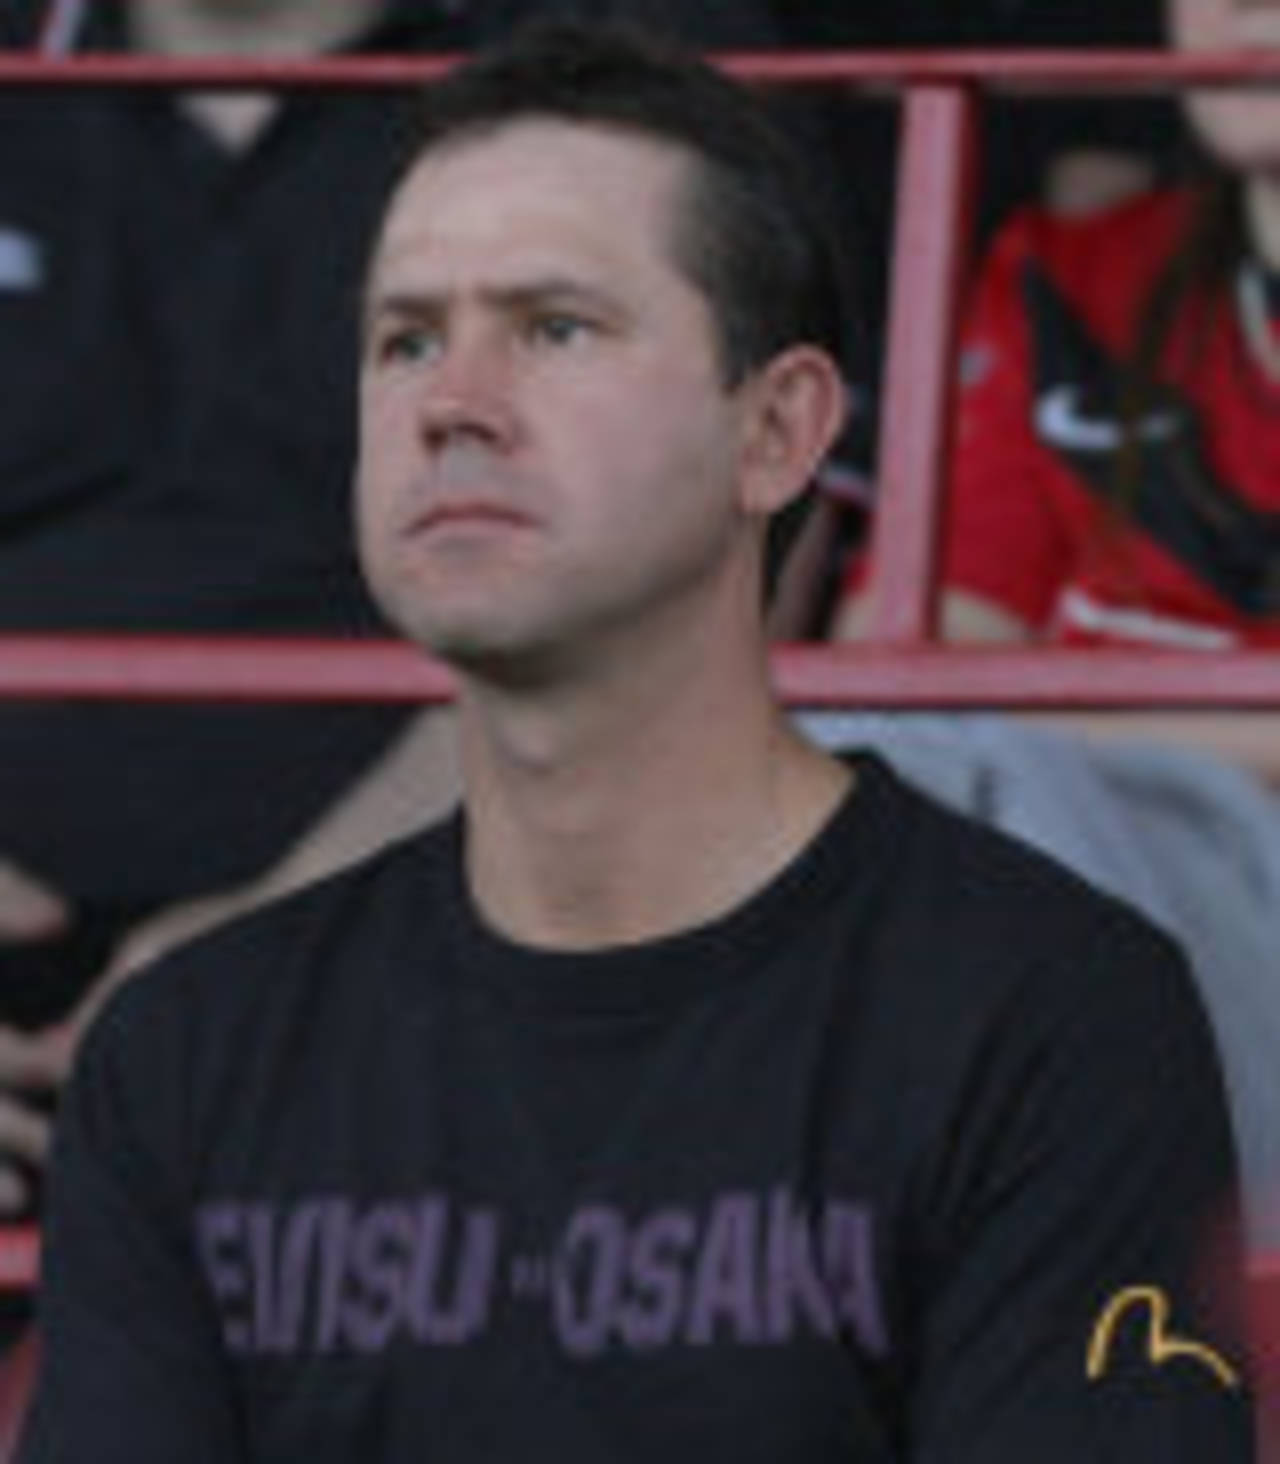 Ricky Ponting watches a friendly football match between a Manchester United XI and Altrincham FC, Altrincham, August 4, 2009 